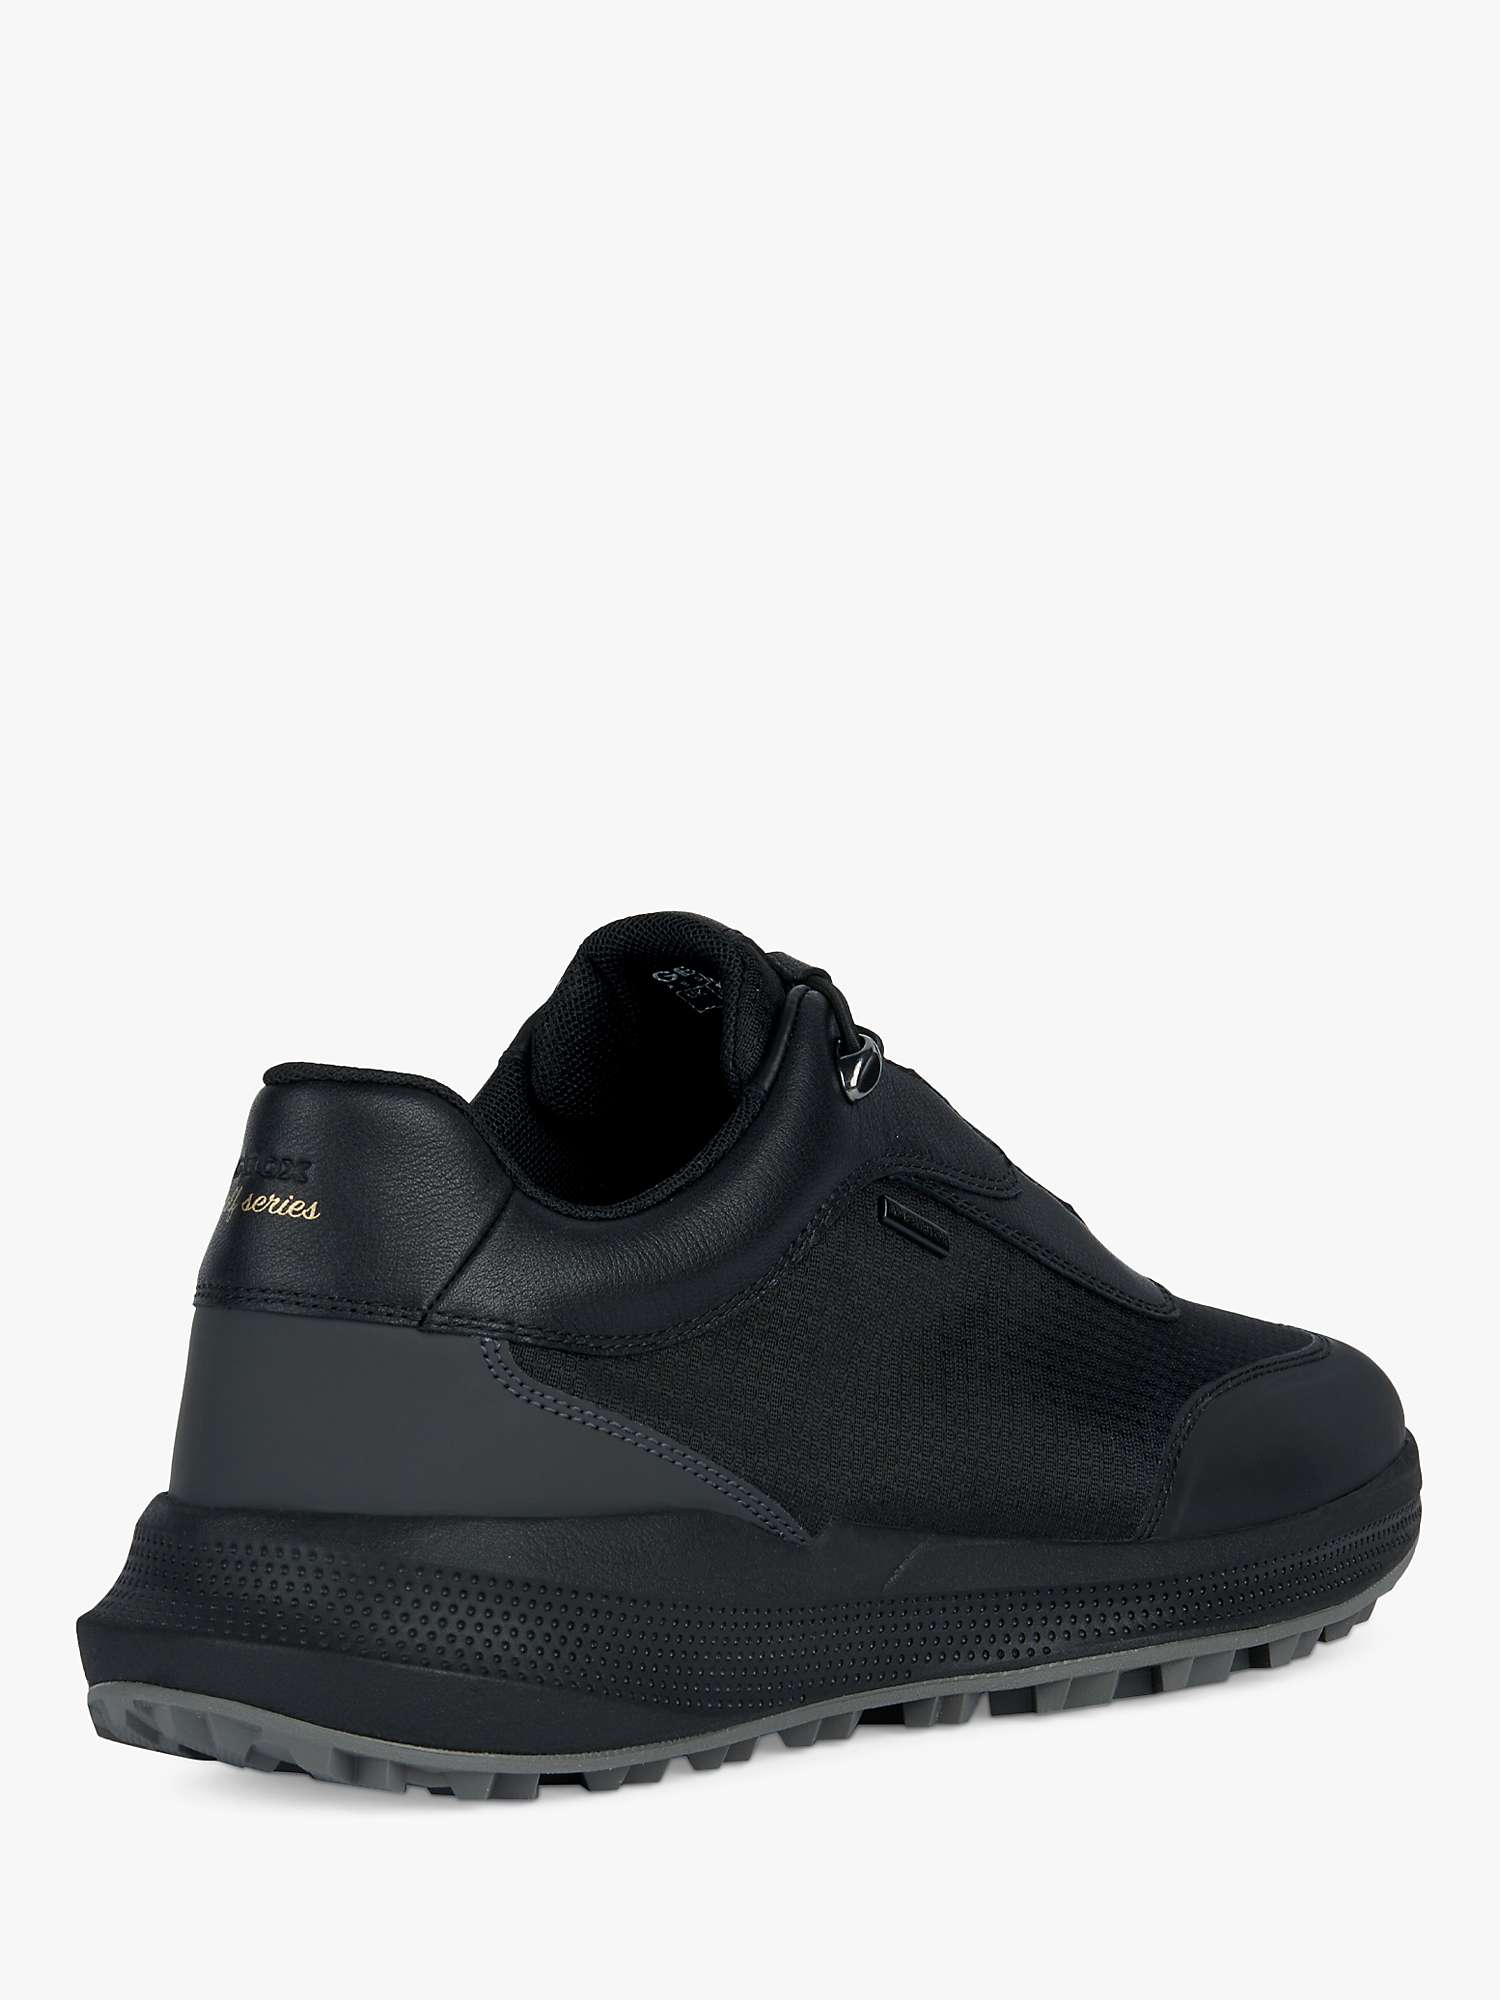 Buy Geox PG1X Water Resistant Trainers Online at johnlewis.com